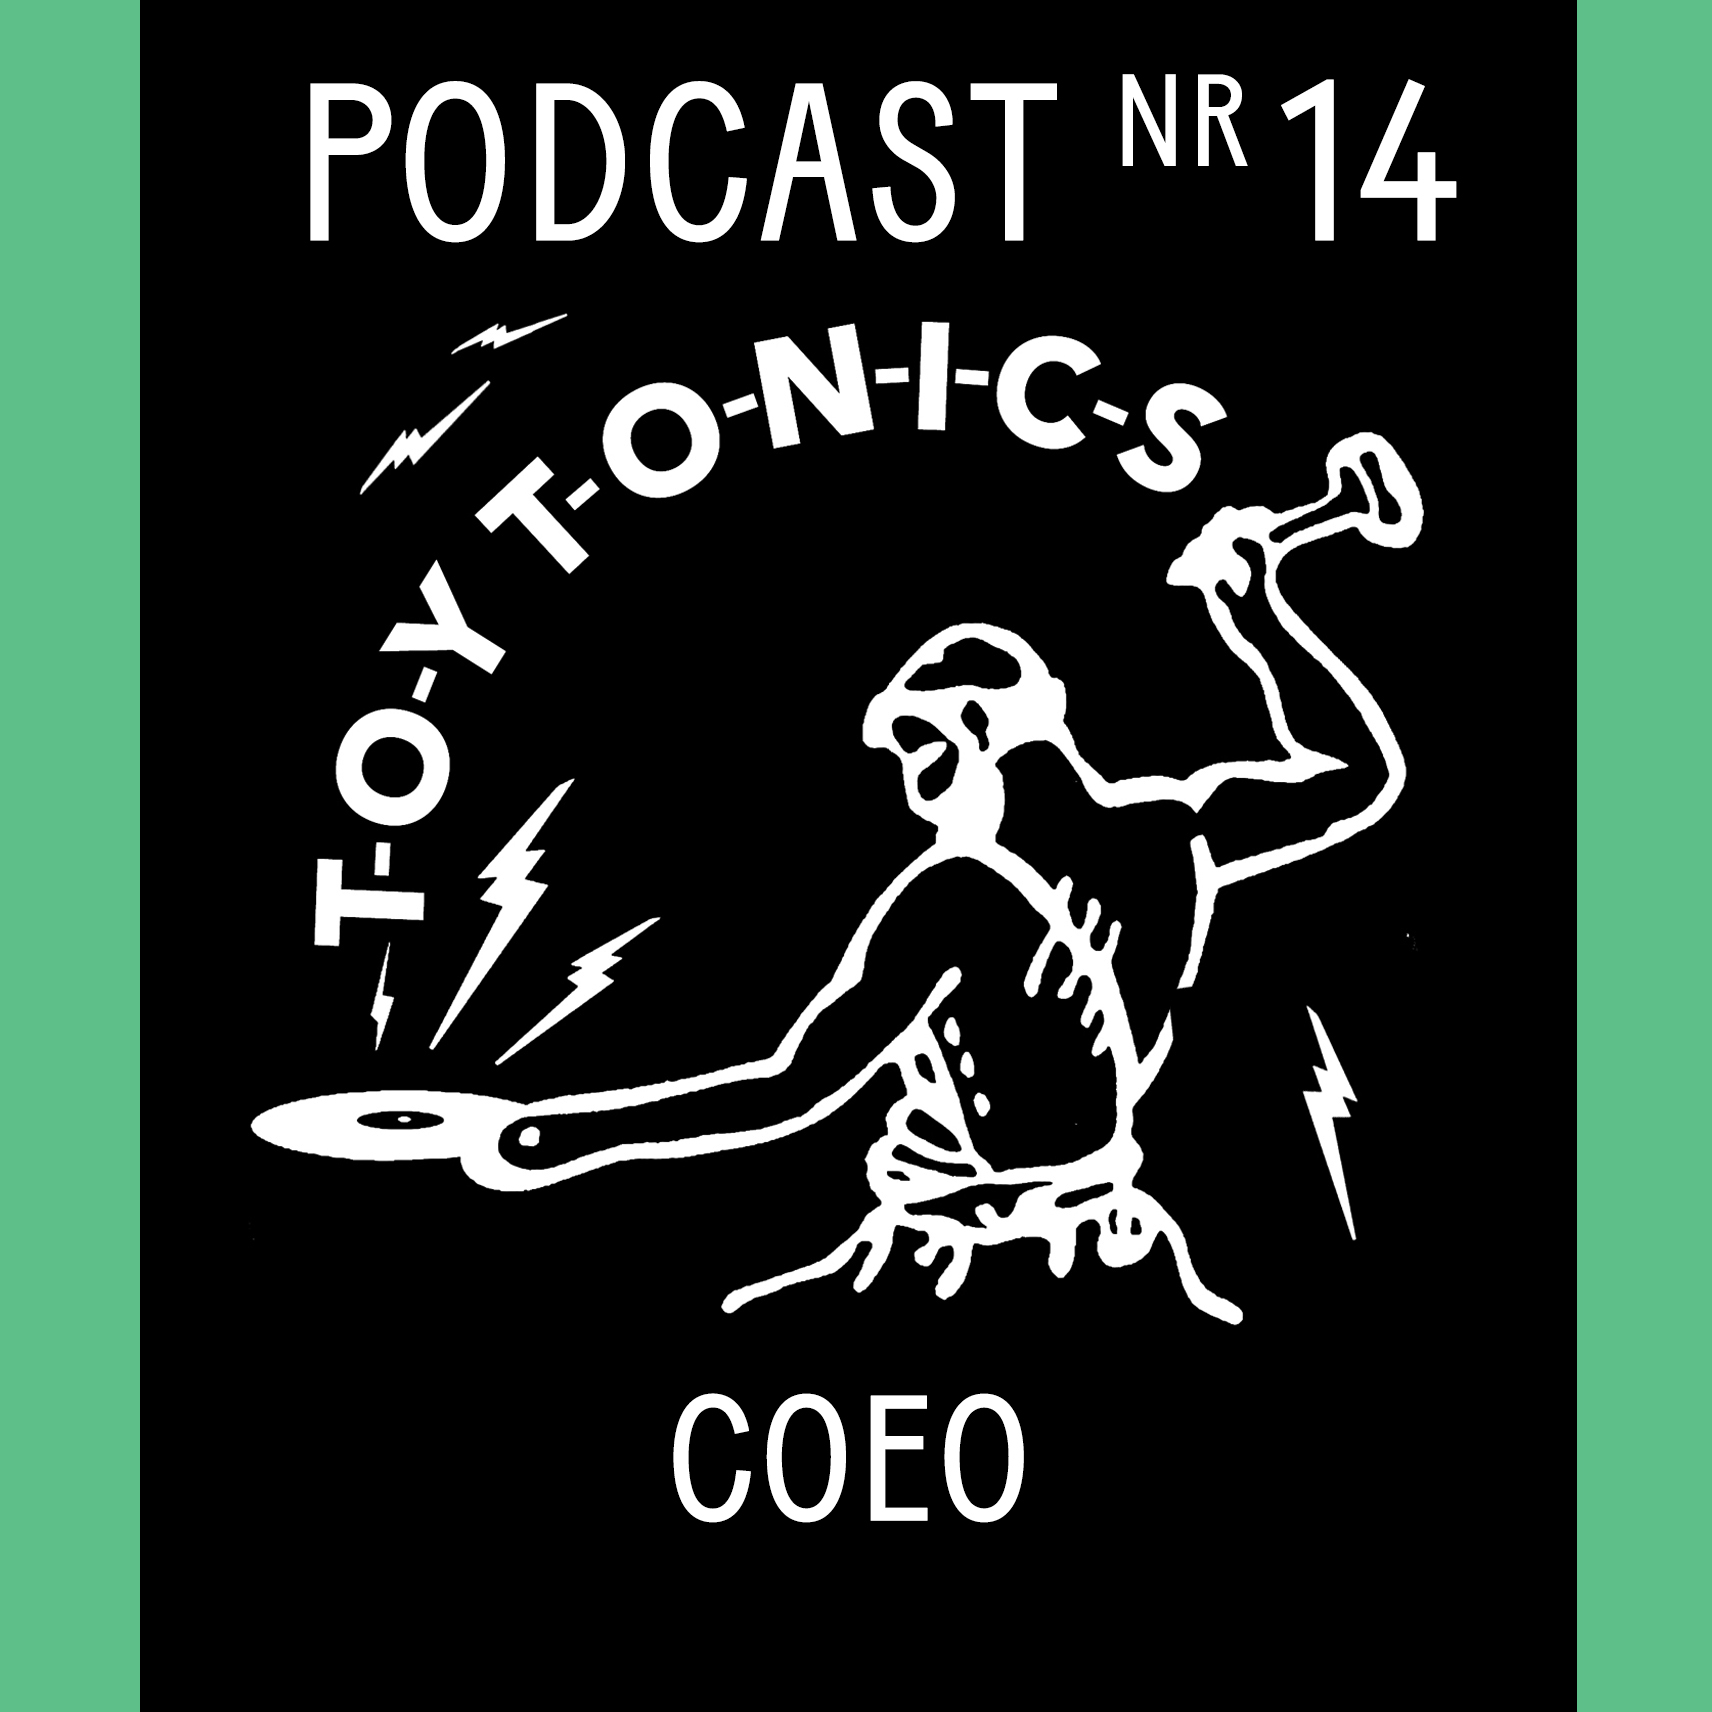 PODCAST NR 14 - COEO